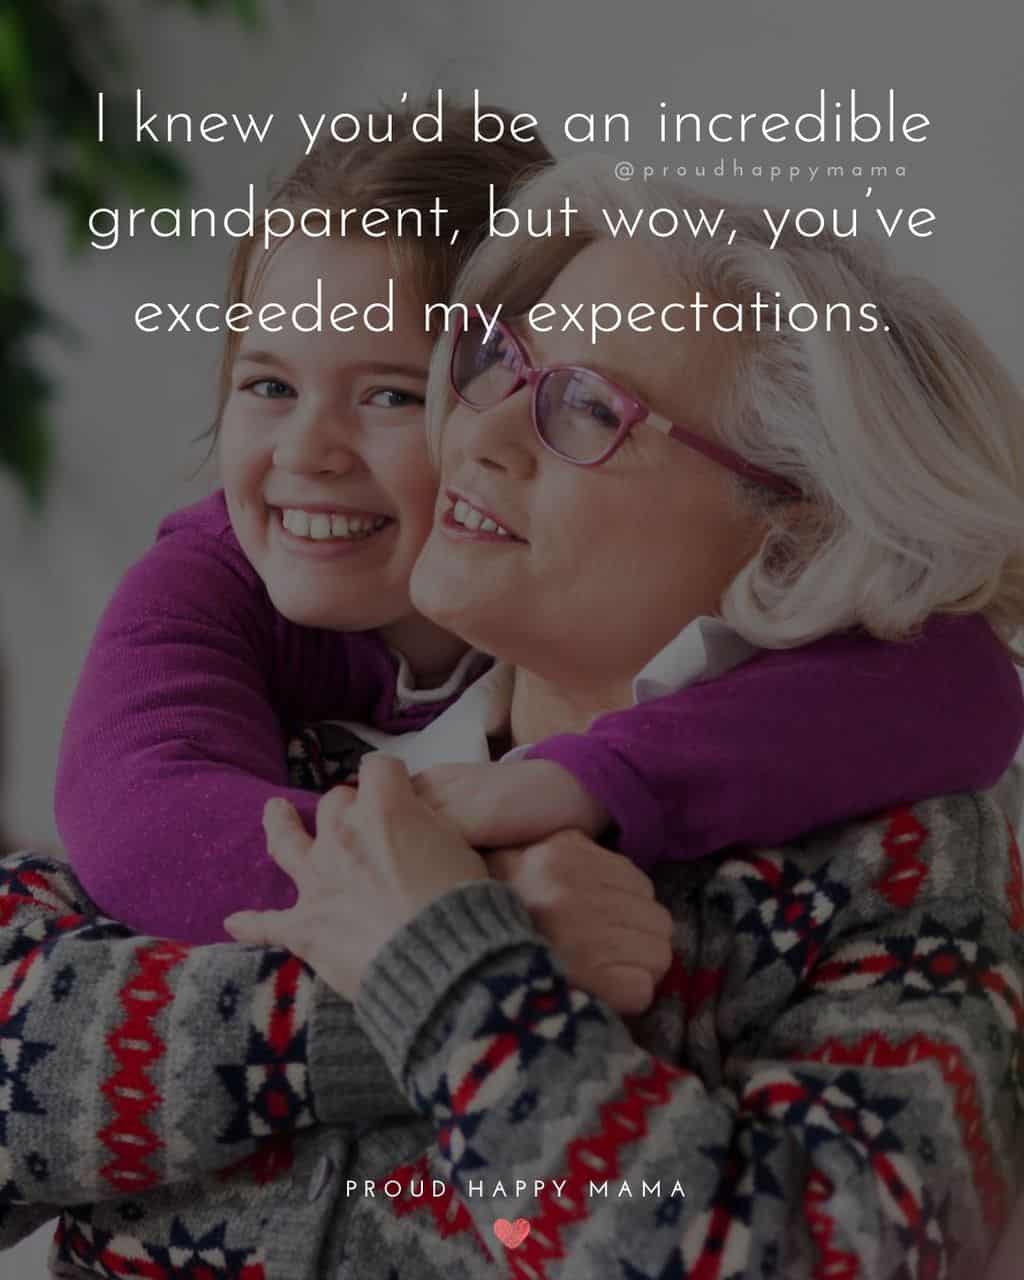 Grandparent Quotes – I knew you’d be an incredible grandparent, but wow, you’ve exceeded my expectations.’